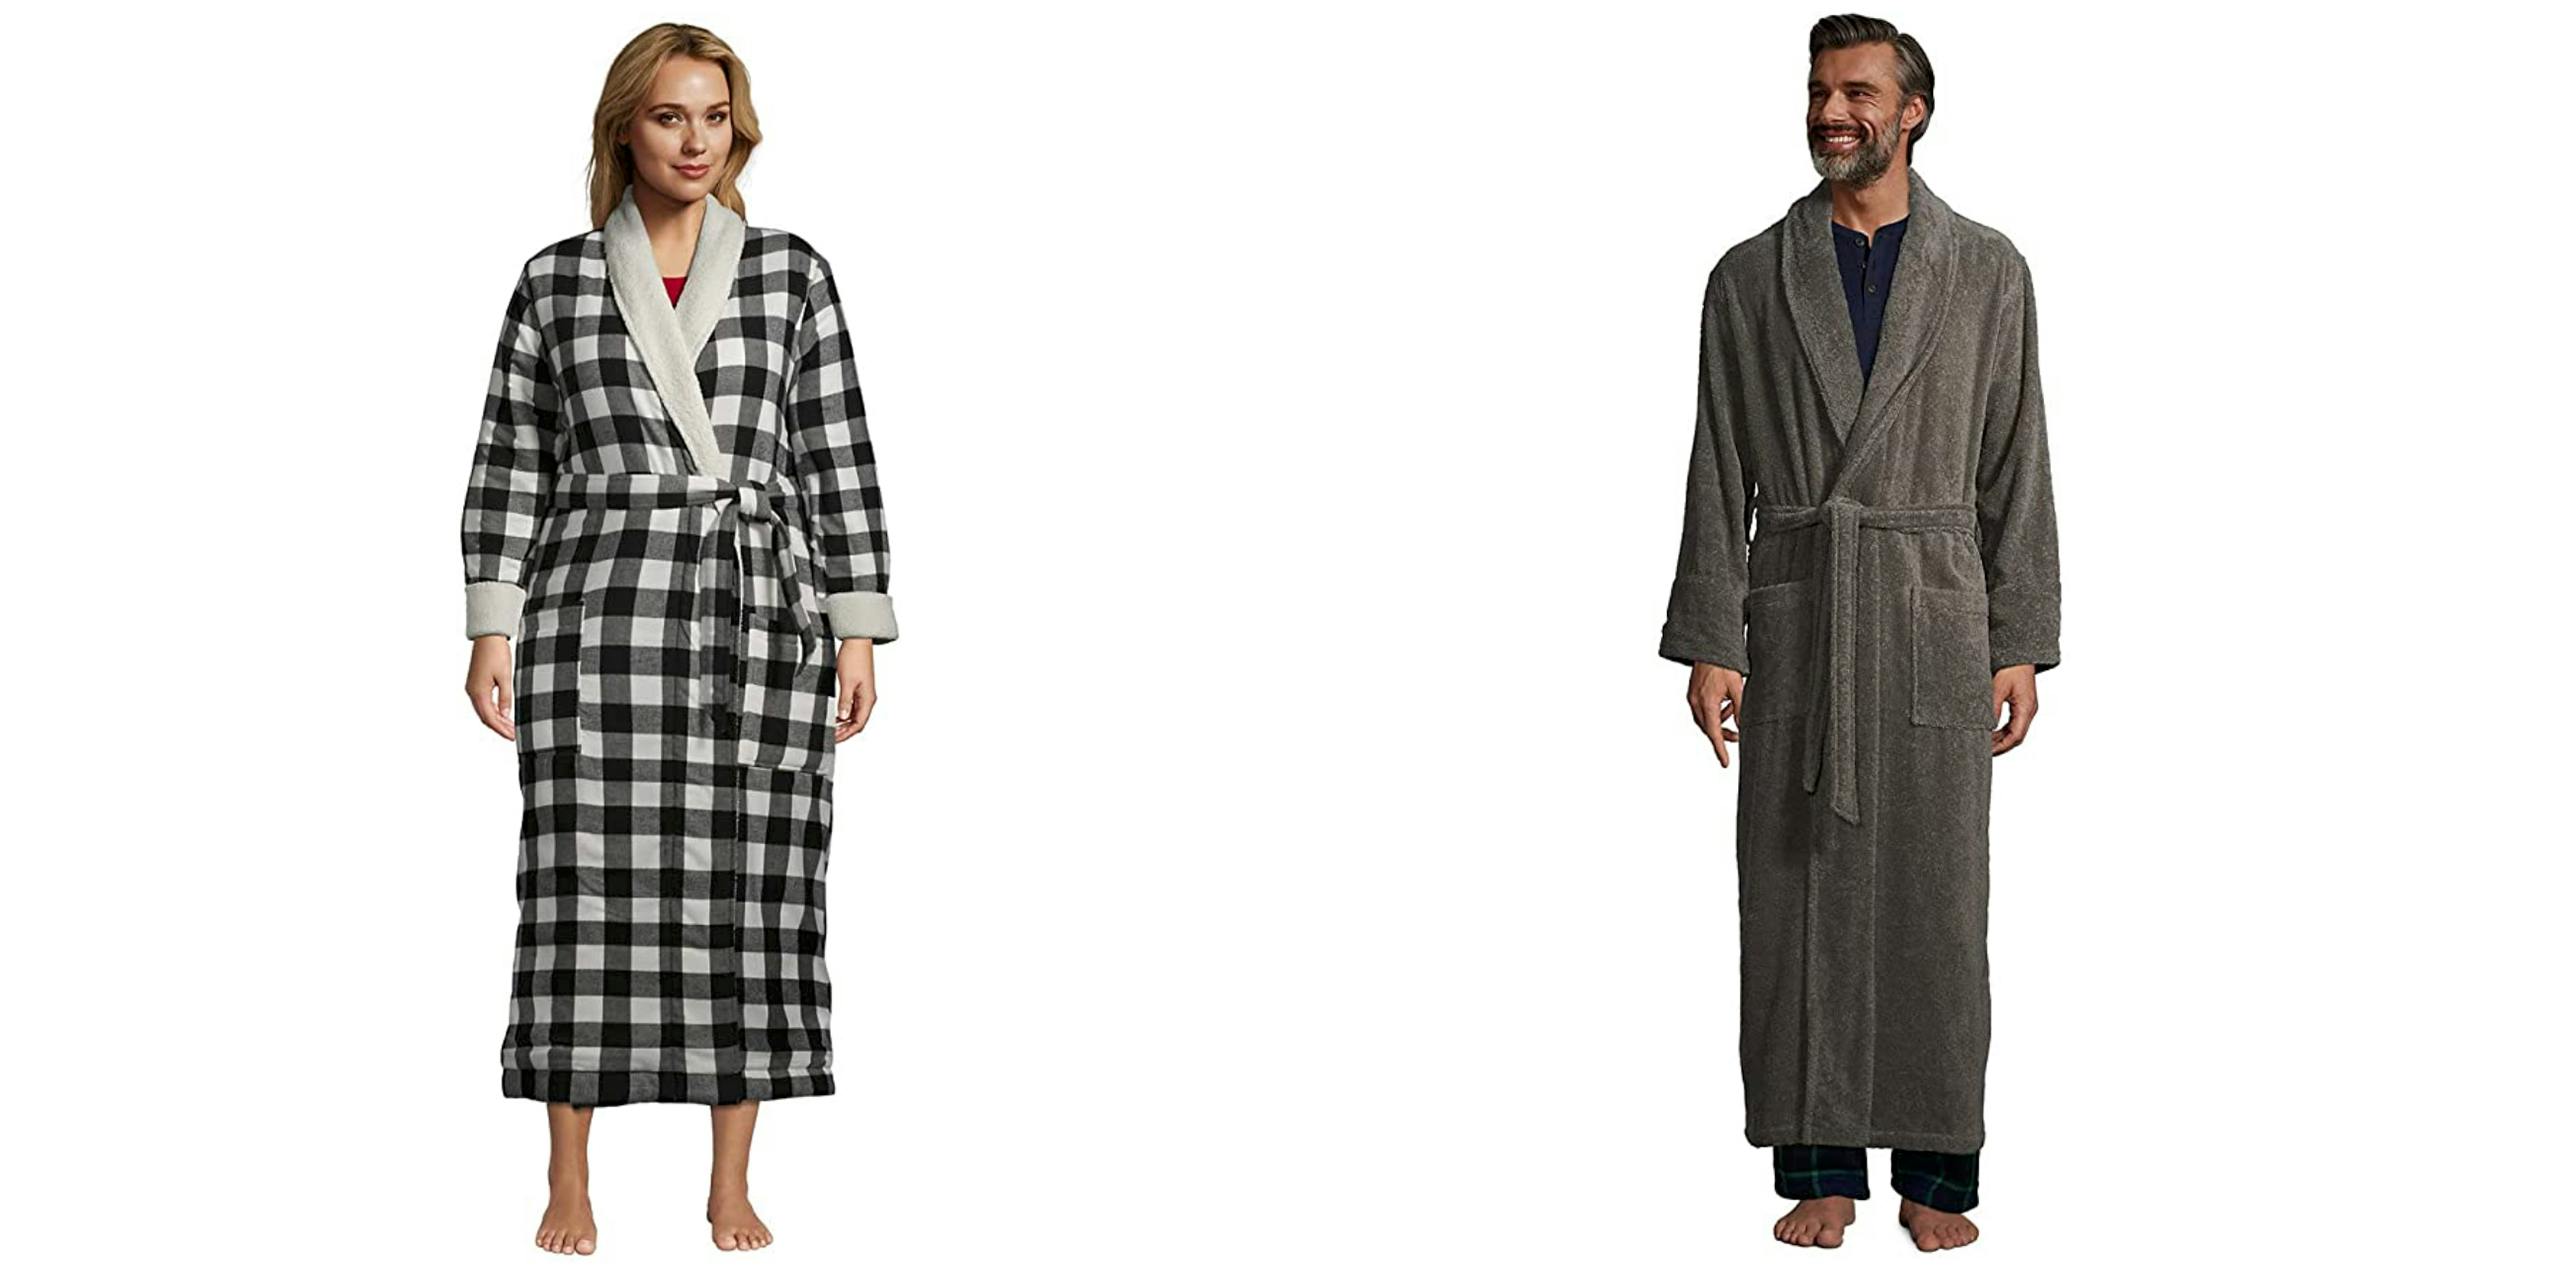 A Land's End robe on men and women.